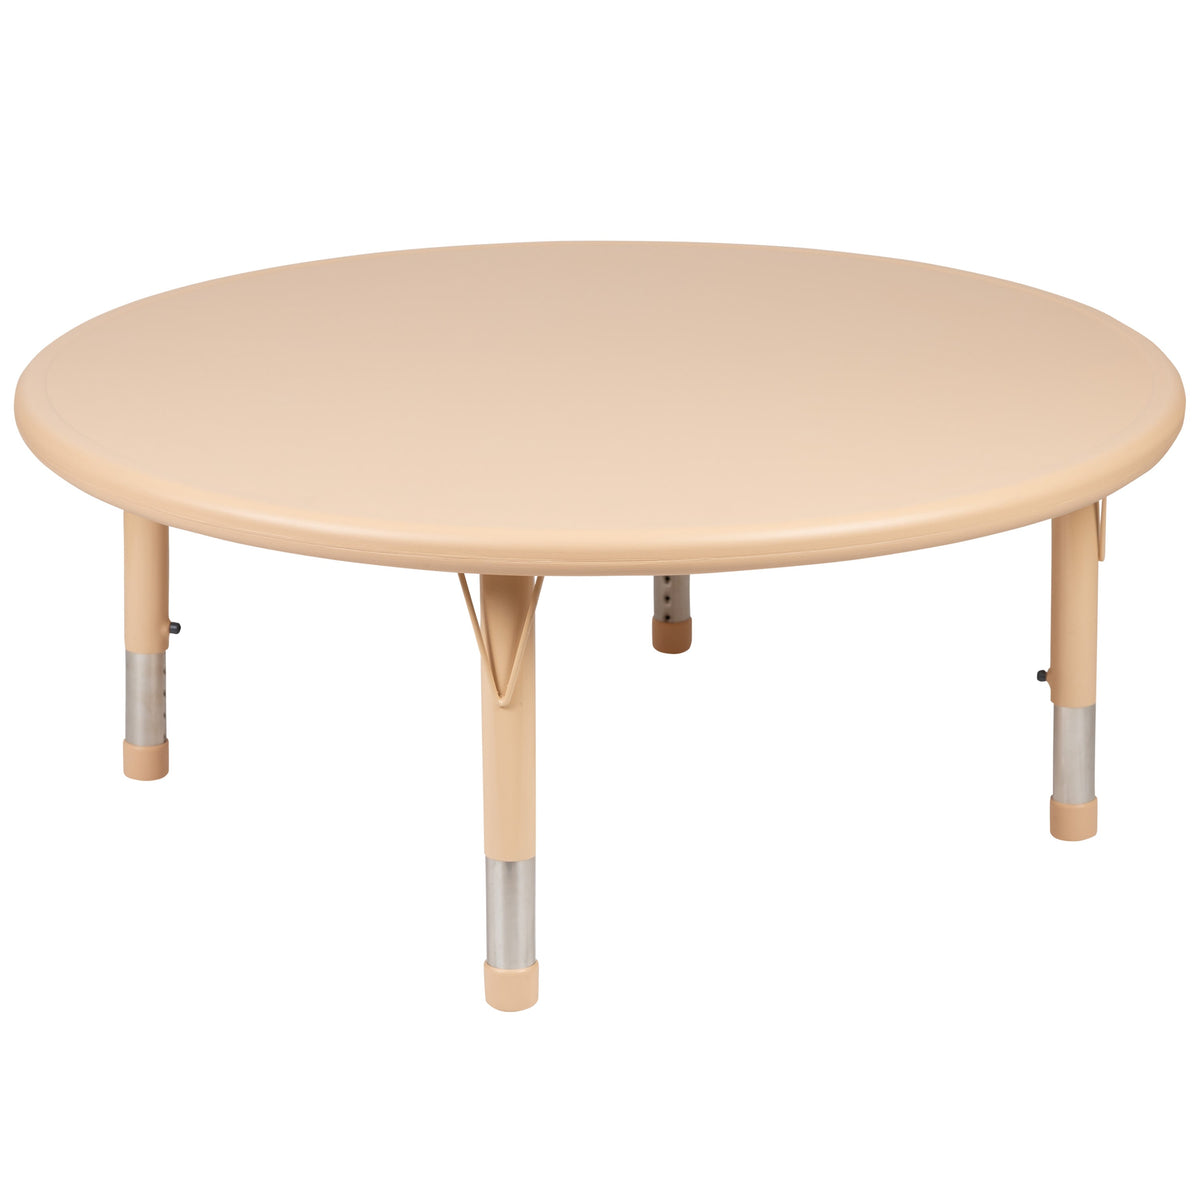 Natural |#| 45inch Round Natural Plastic Height Adjustable Activity Table - School Table for 4